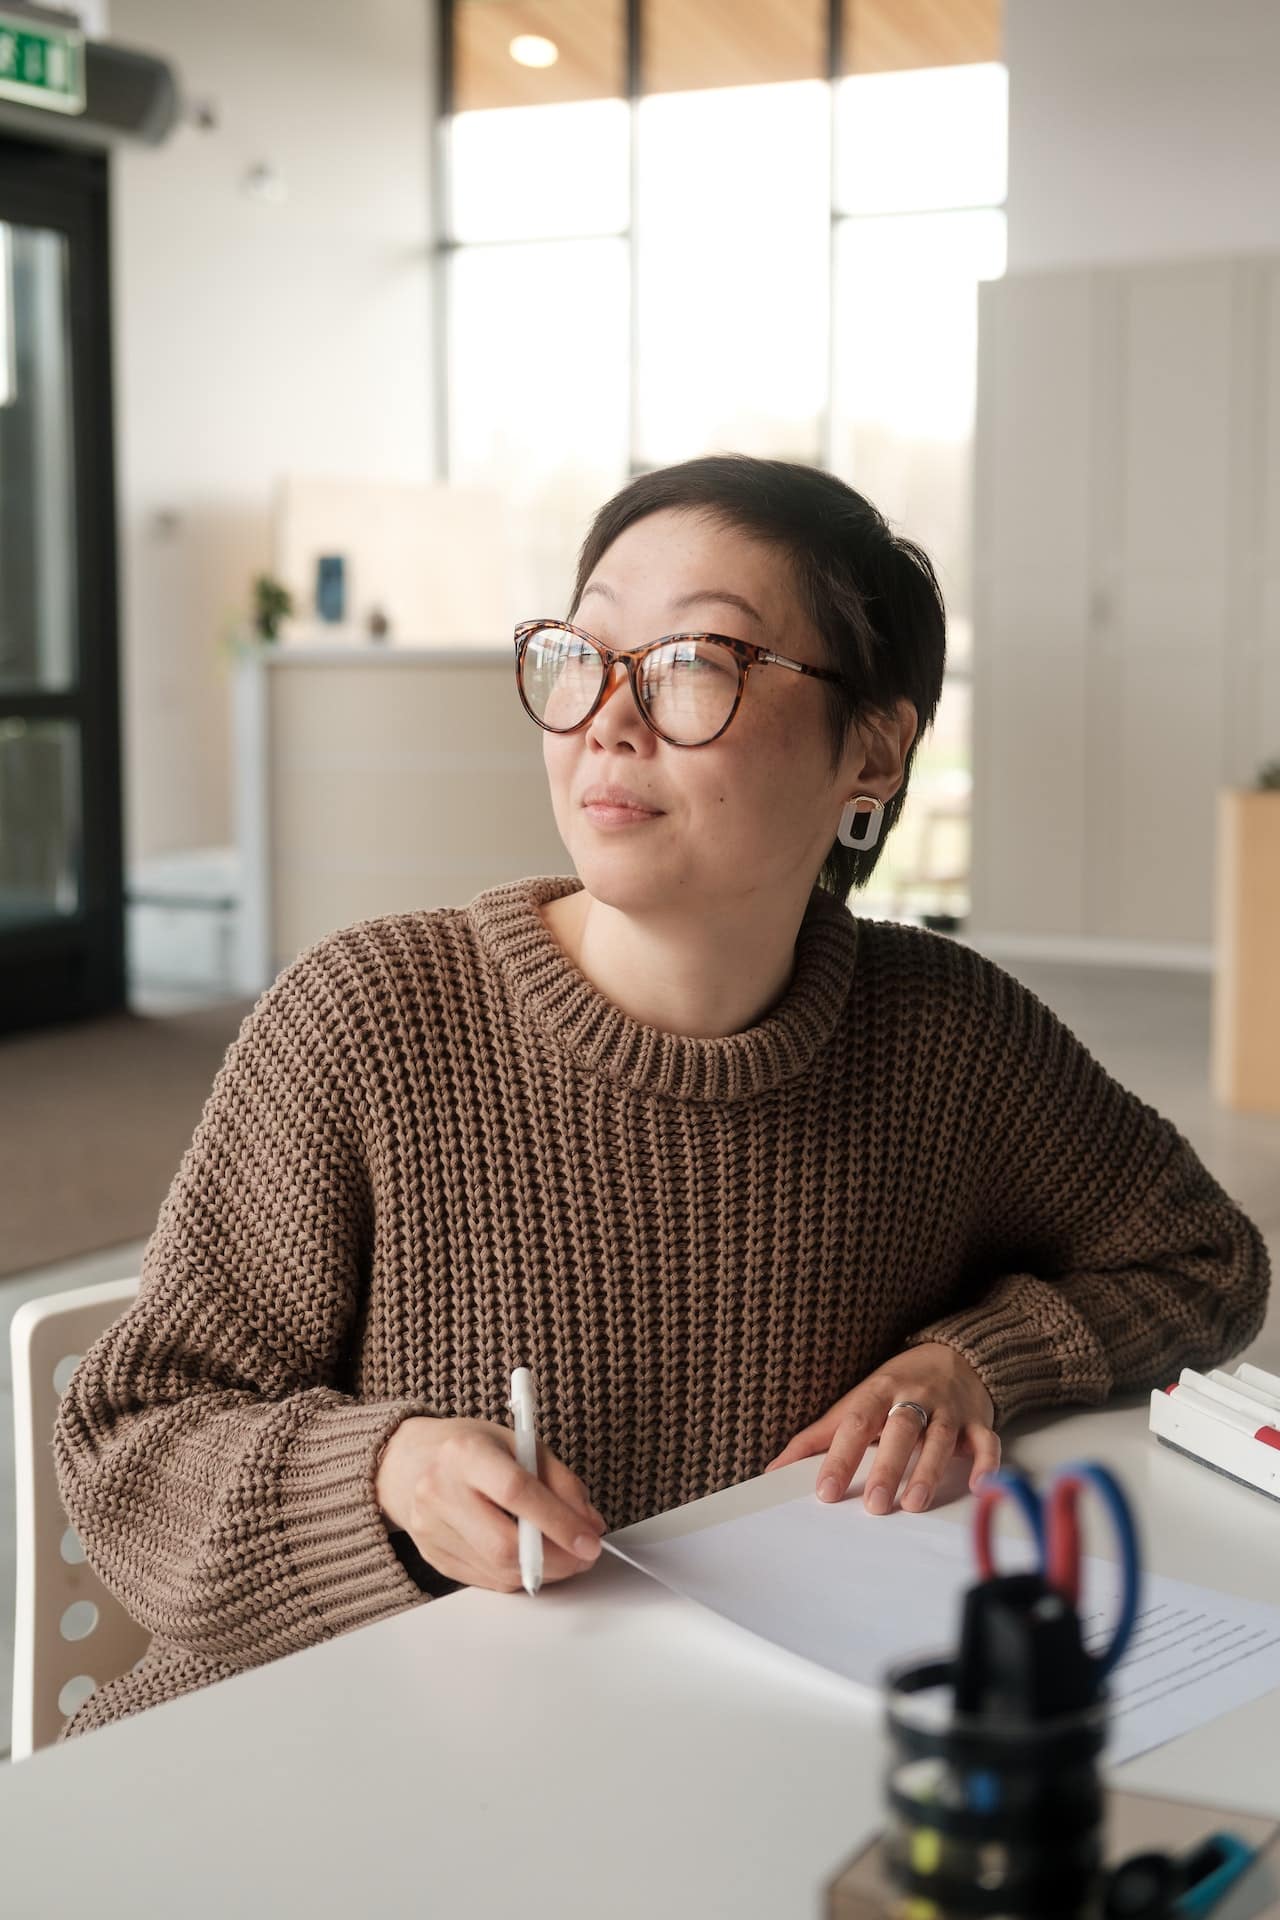 Asian American person with short hair and glasses looking up reflectively while writing